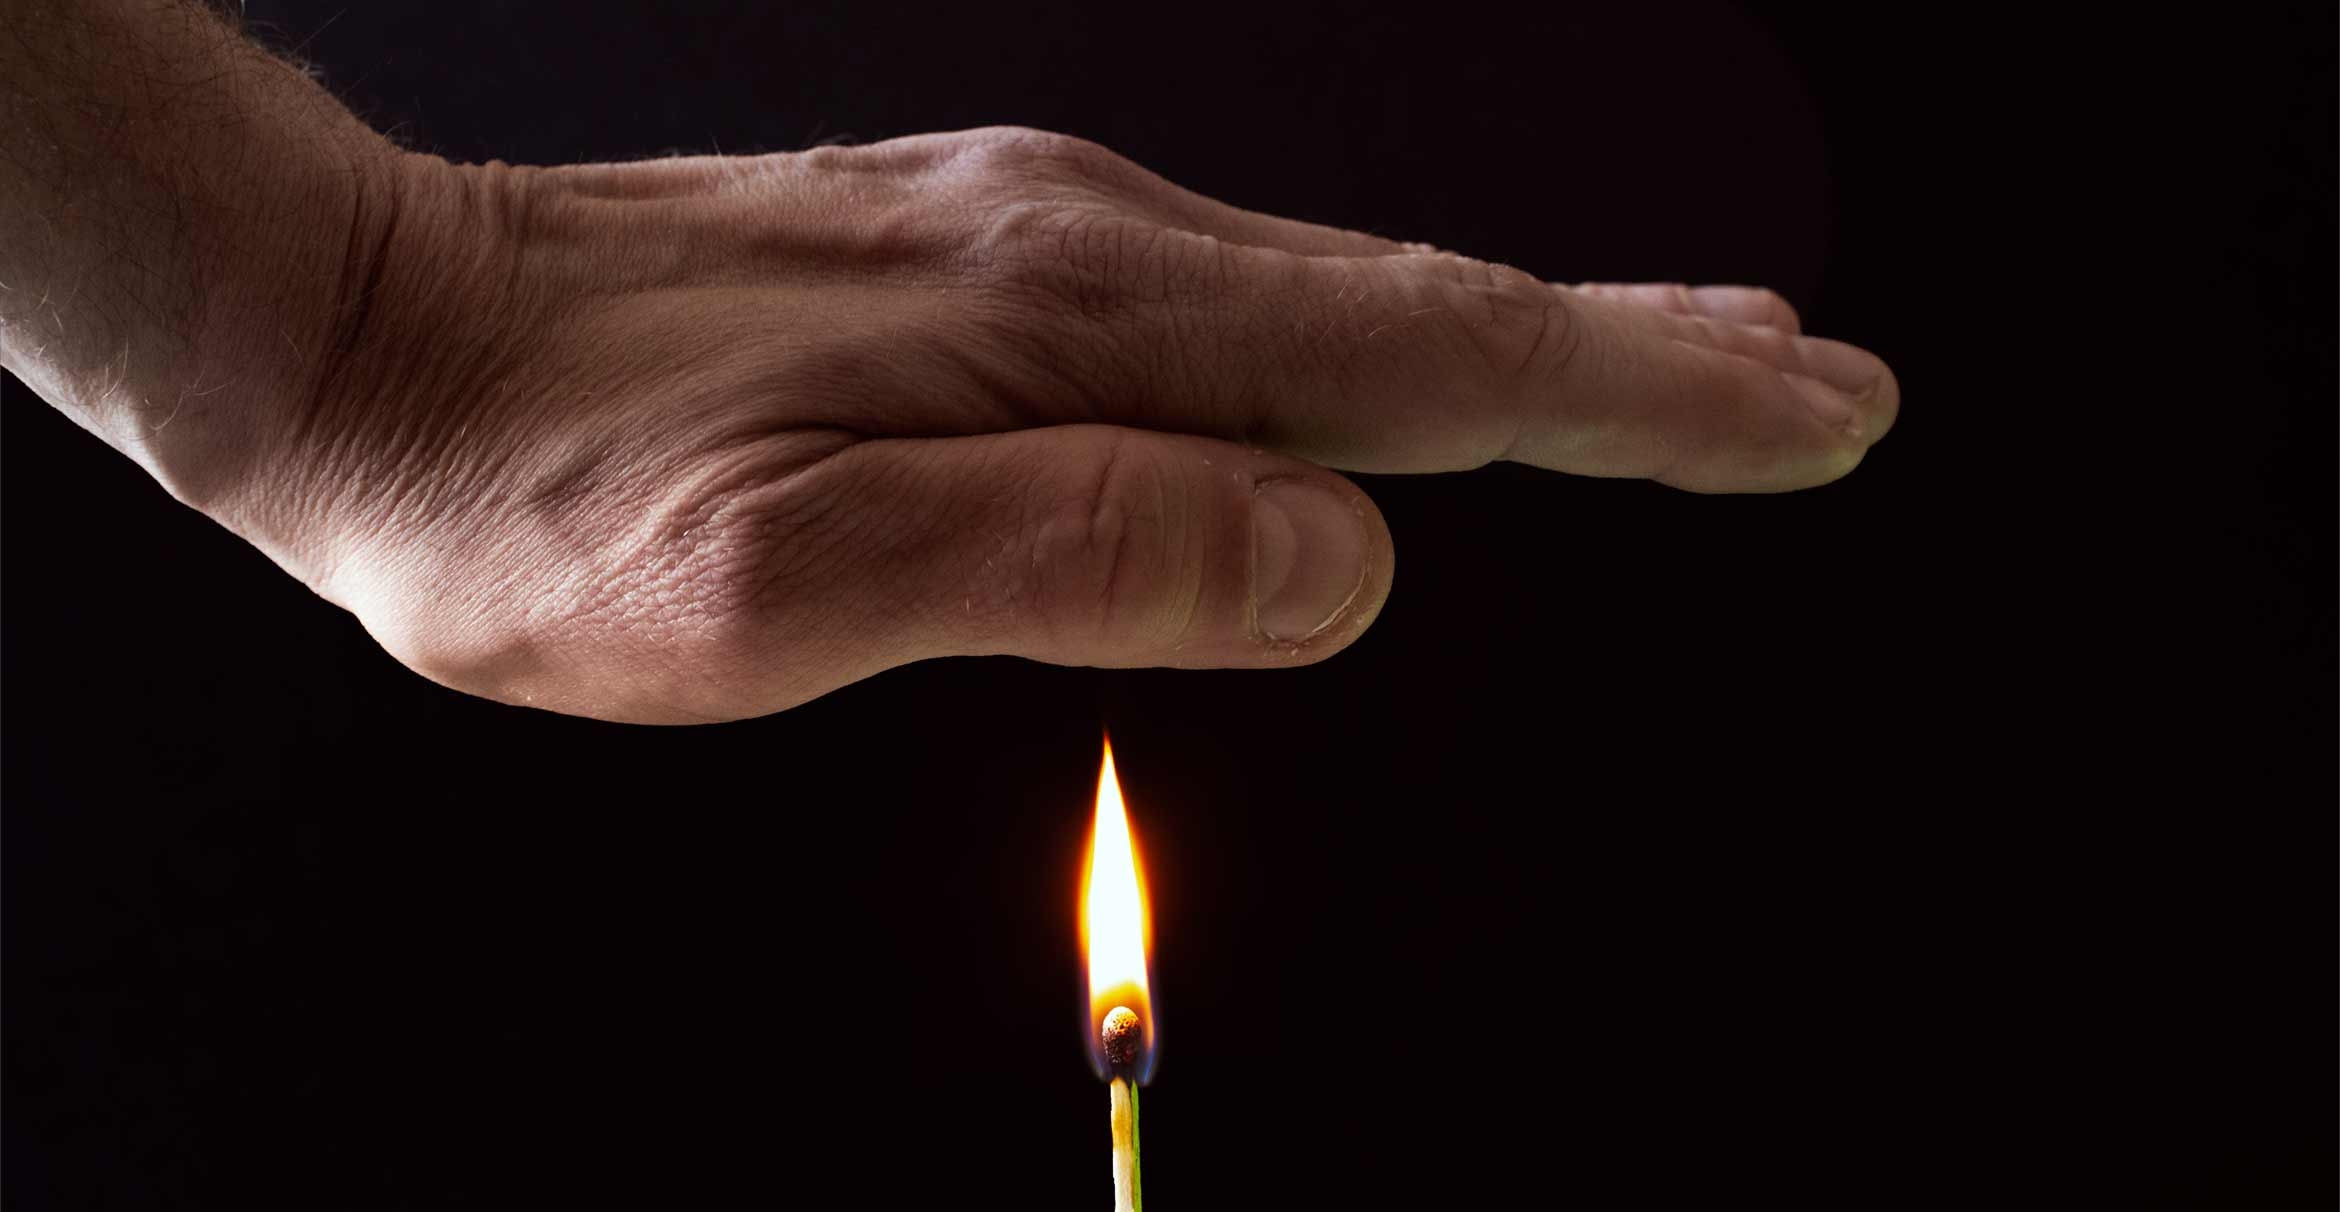 A hand hovering over a match